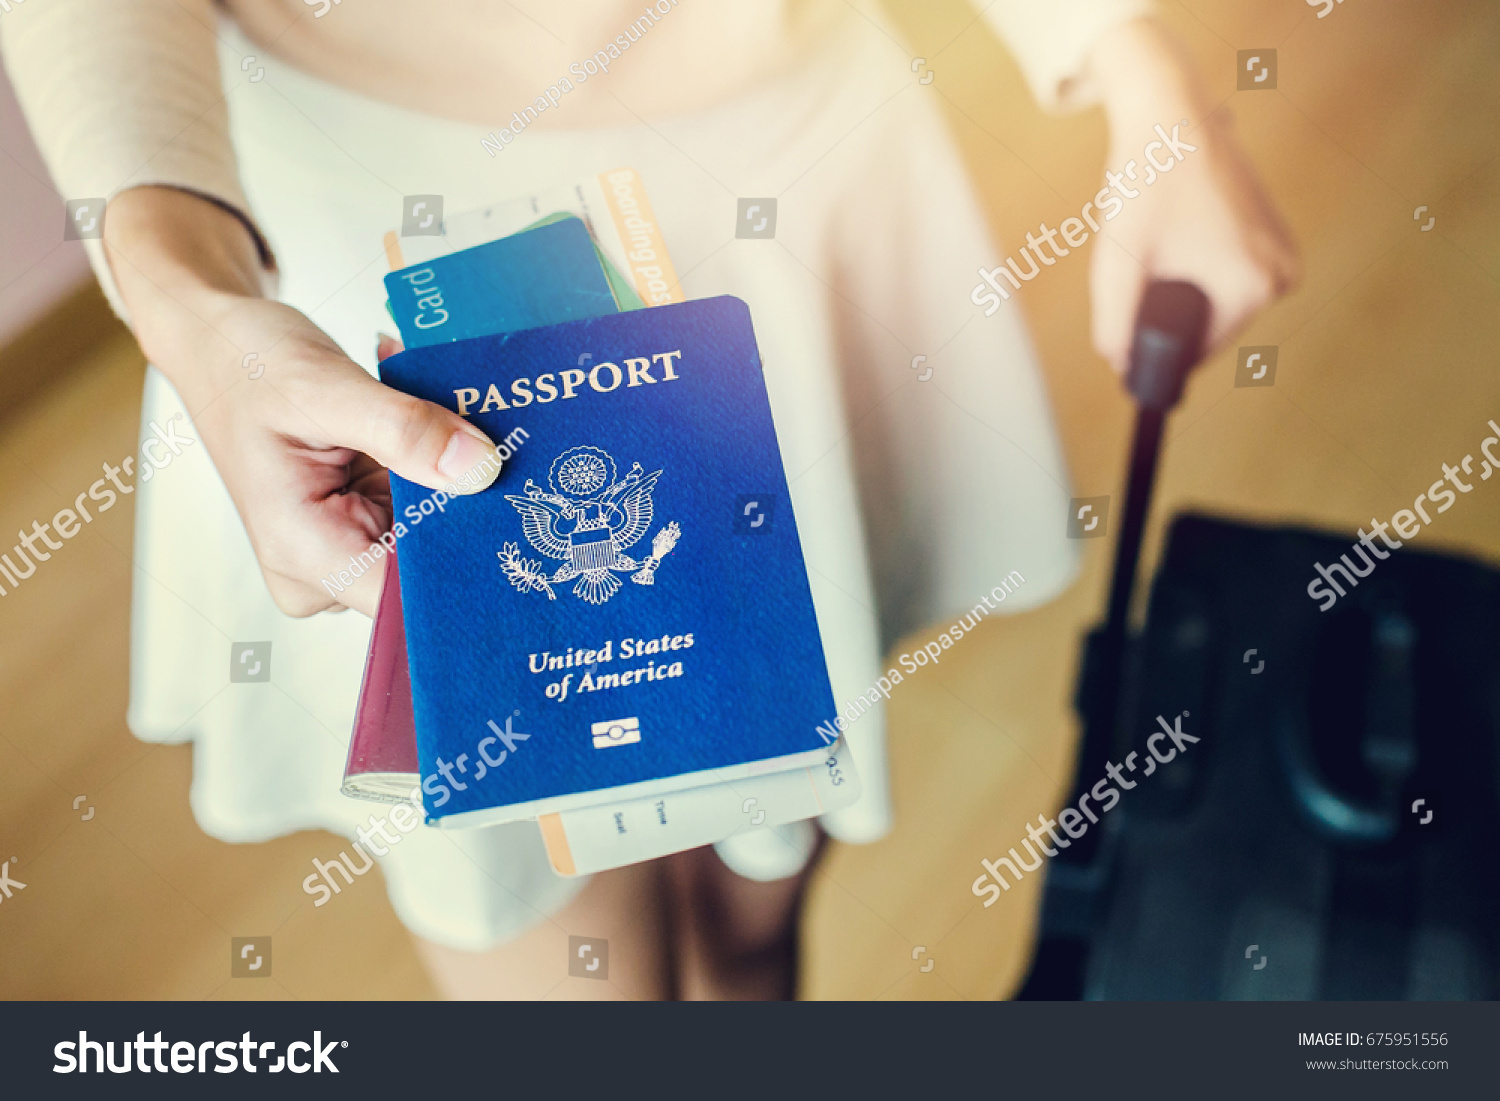 Closeup of girl holding passports and boarding pass #675951556